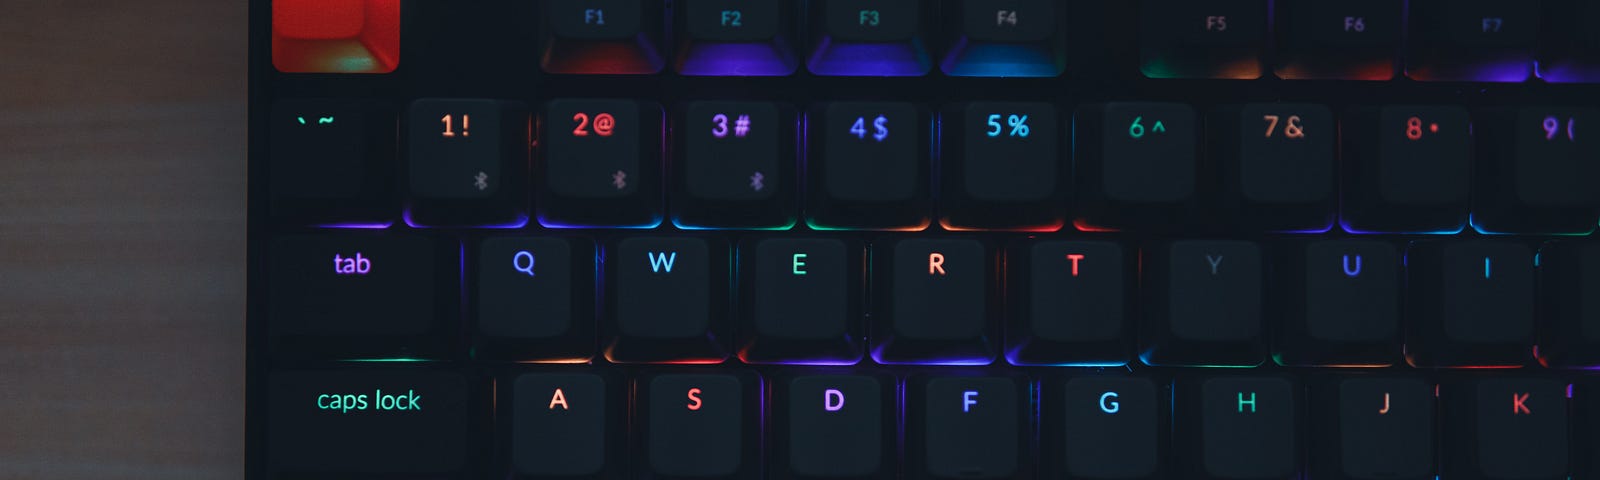 An image of the left side of a keyboard